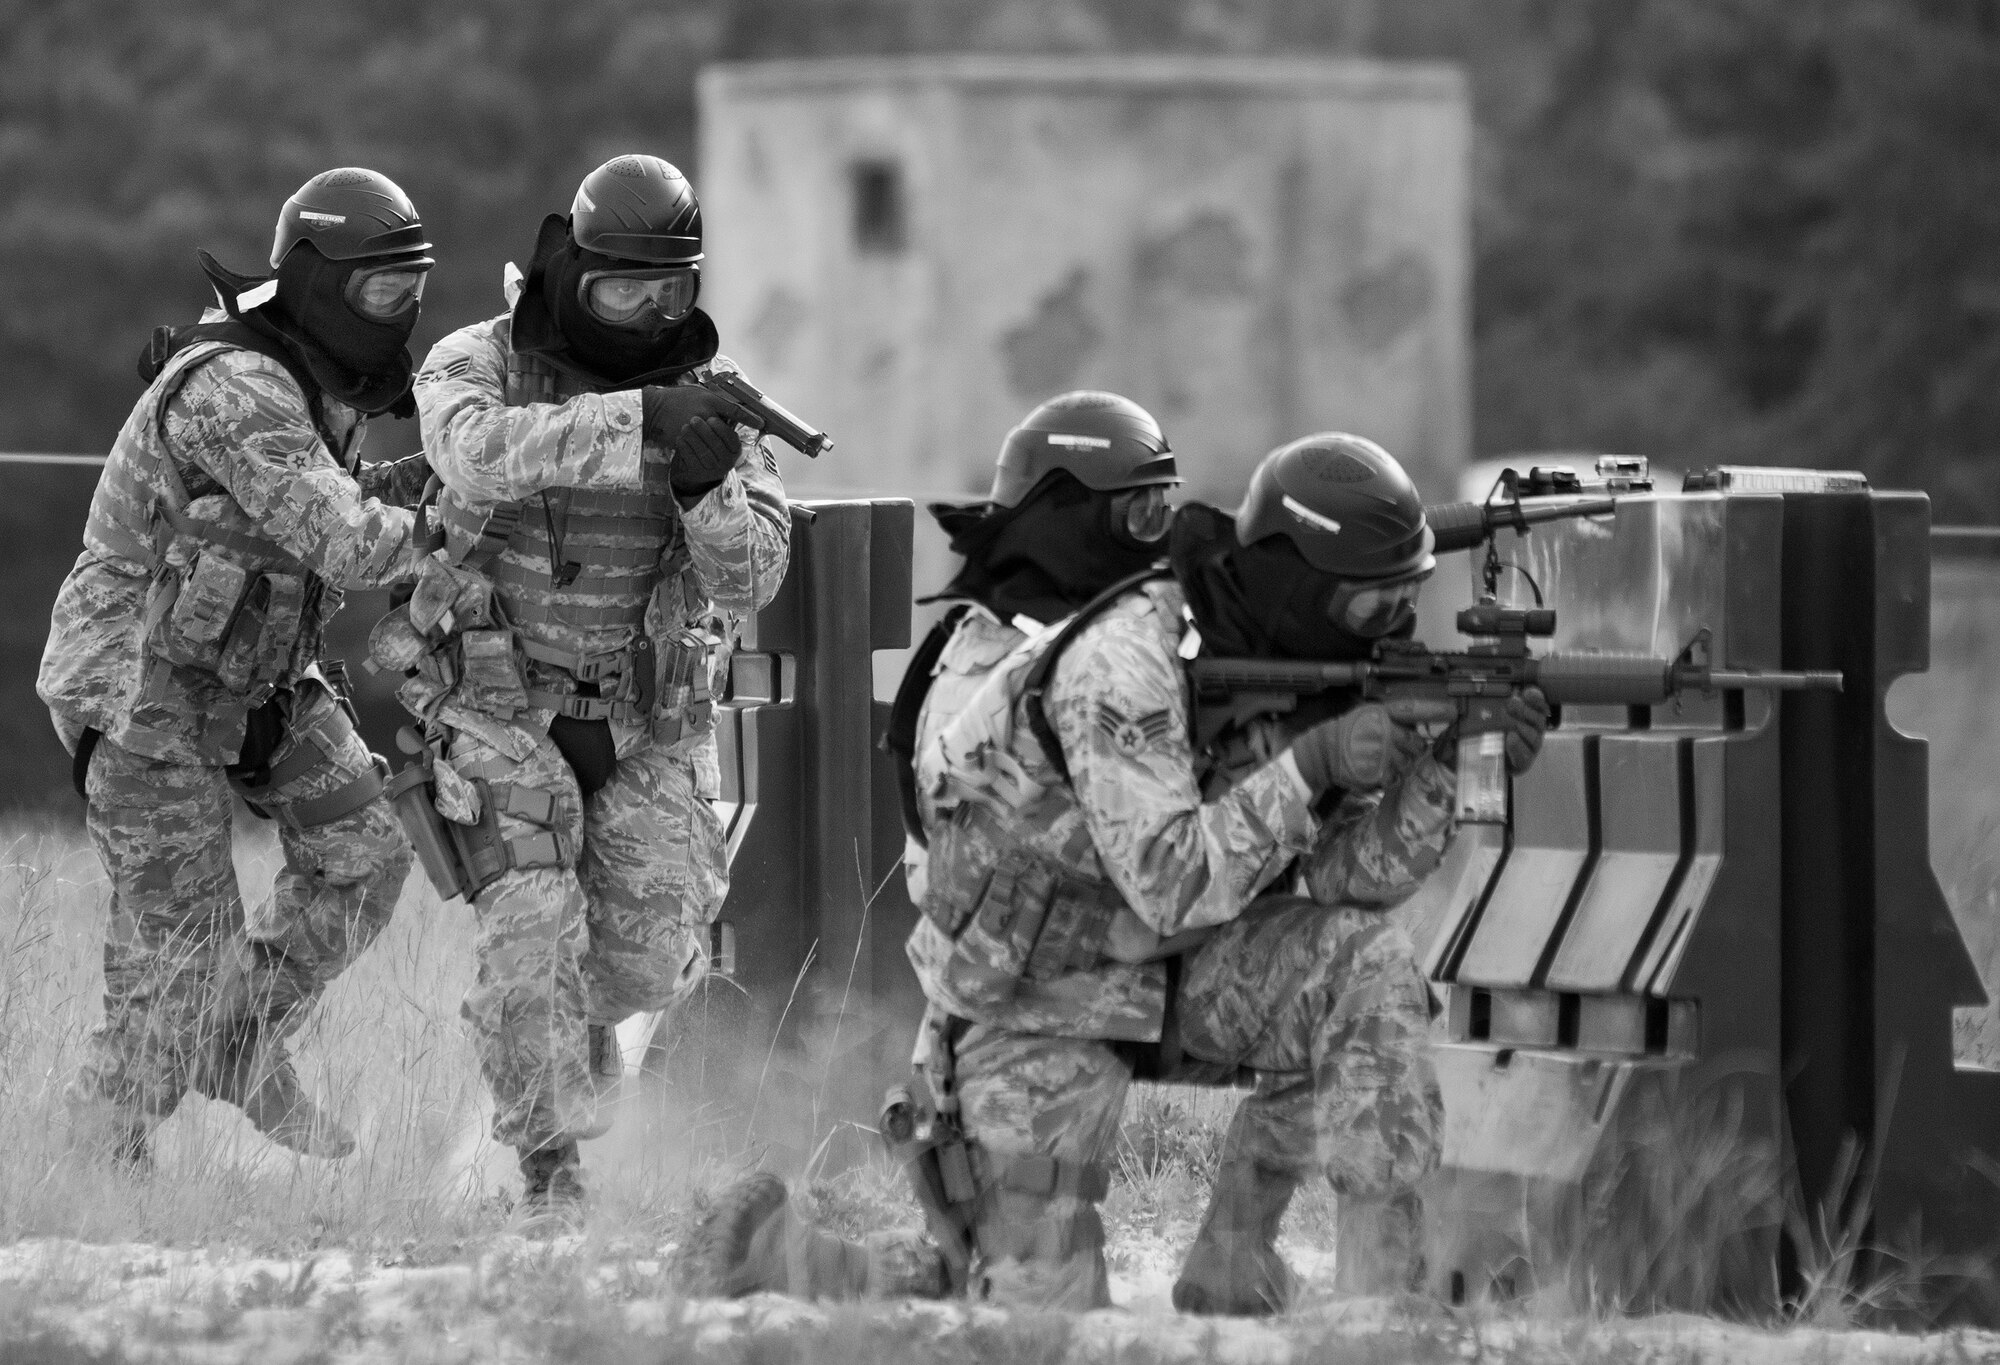 A team of 96th Security Forces Squadron Airmen perform a side-advancing movement during a shoot, move and communicate drill in June at Eglin Air Force Base, Fla.  This mandatory training requirement is in addition to the Airmen's annual weapons qualification training.  The exercise consists of Airmen firing simmunition ammo while advancing toward, away from and to the side of a target.  This is followed by a building sweep and clear drill. Eglin’s security forces personnel protect and defend the main base, facilities, gates, Duke Field, 7th SFG compound and land and water ranges.  (U.S. Air Force photo/Tech. Sgt. Sam King)